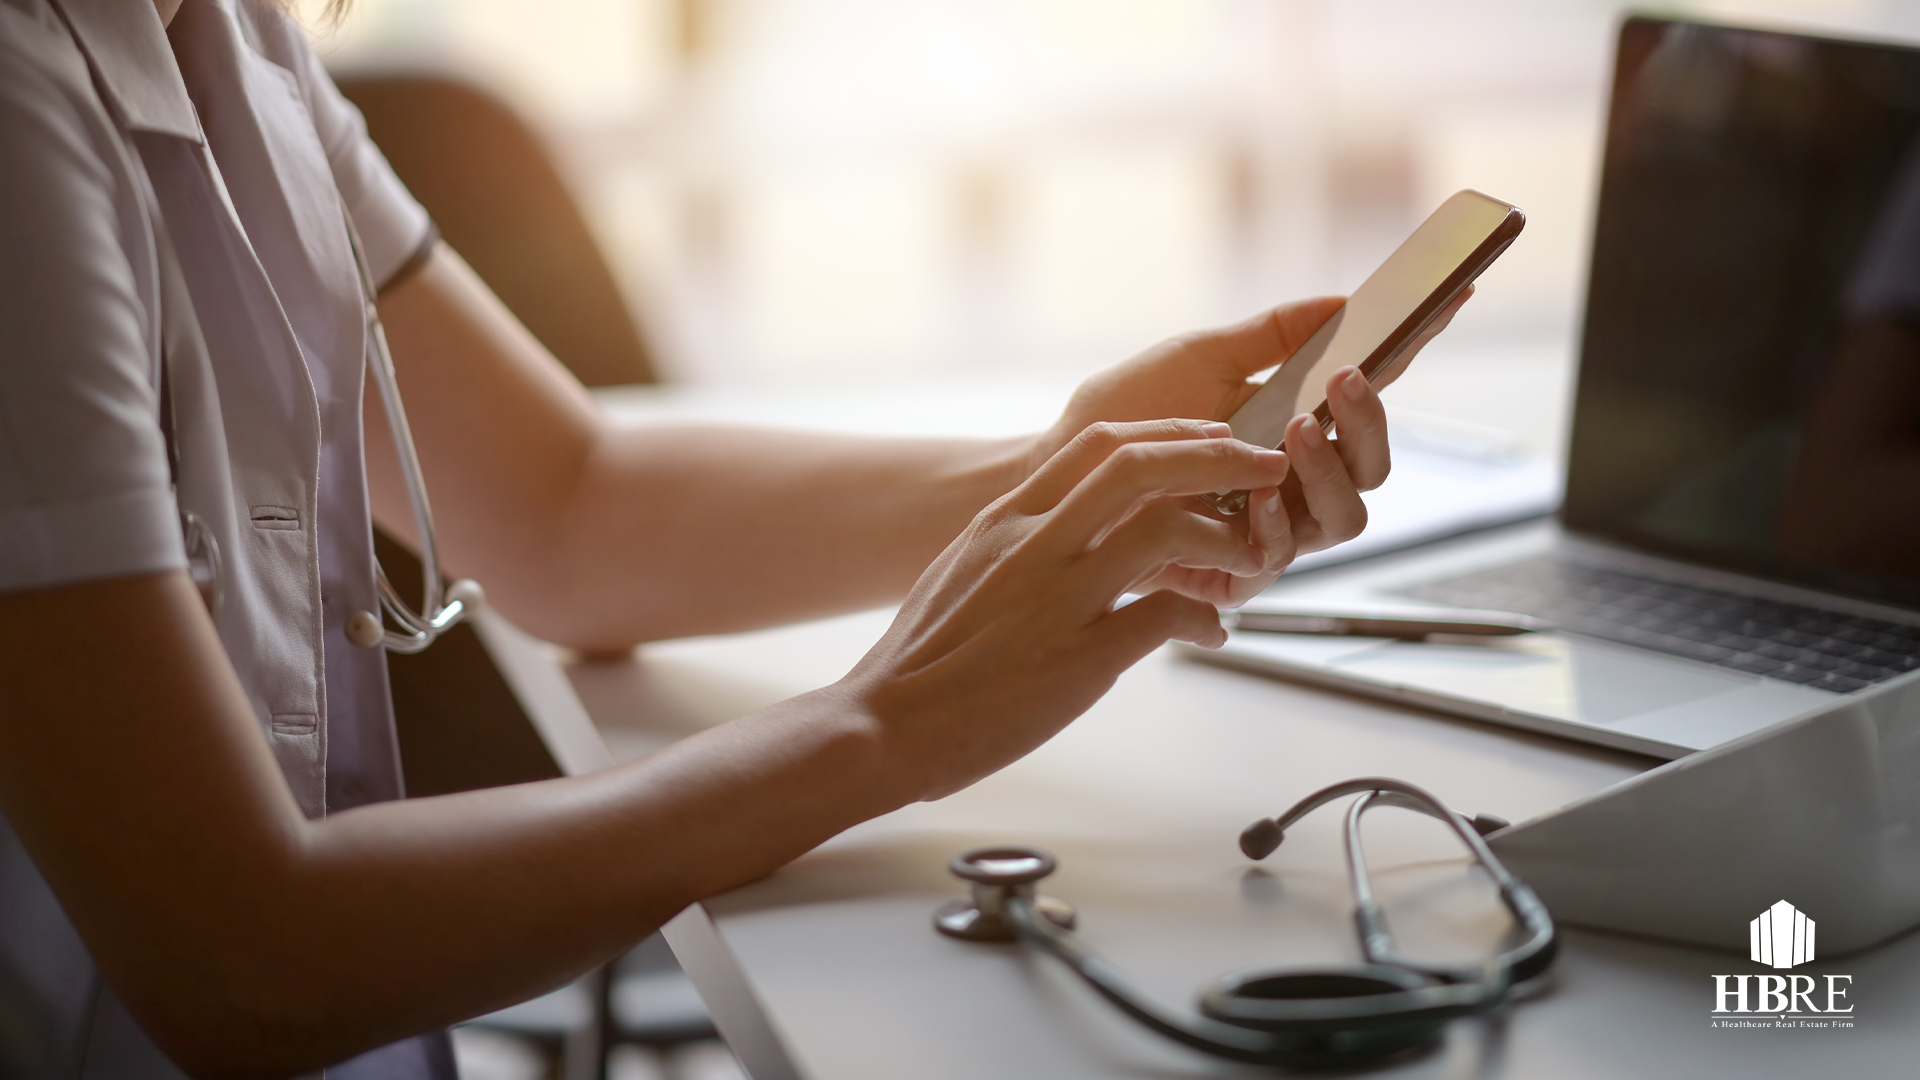 Valuable Apps for Healthcare CRE Landlords